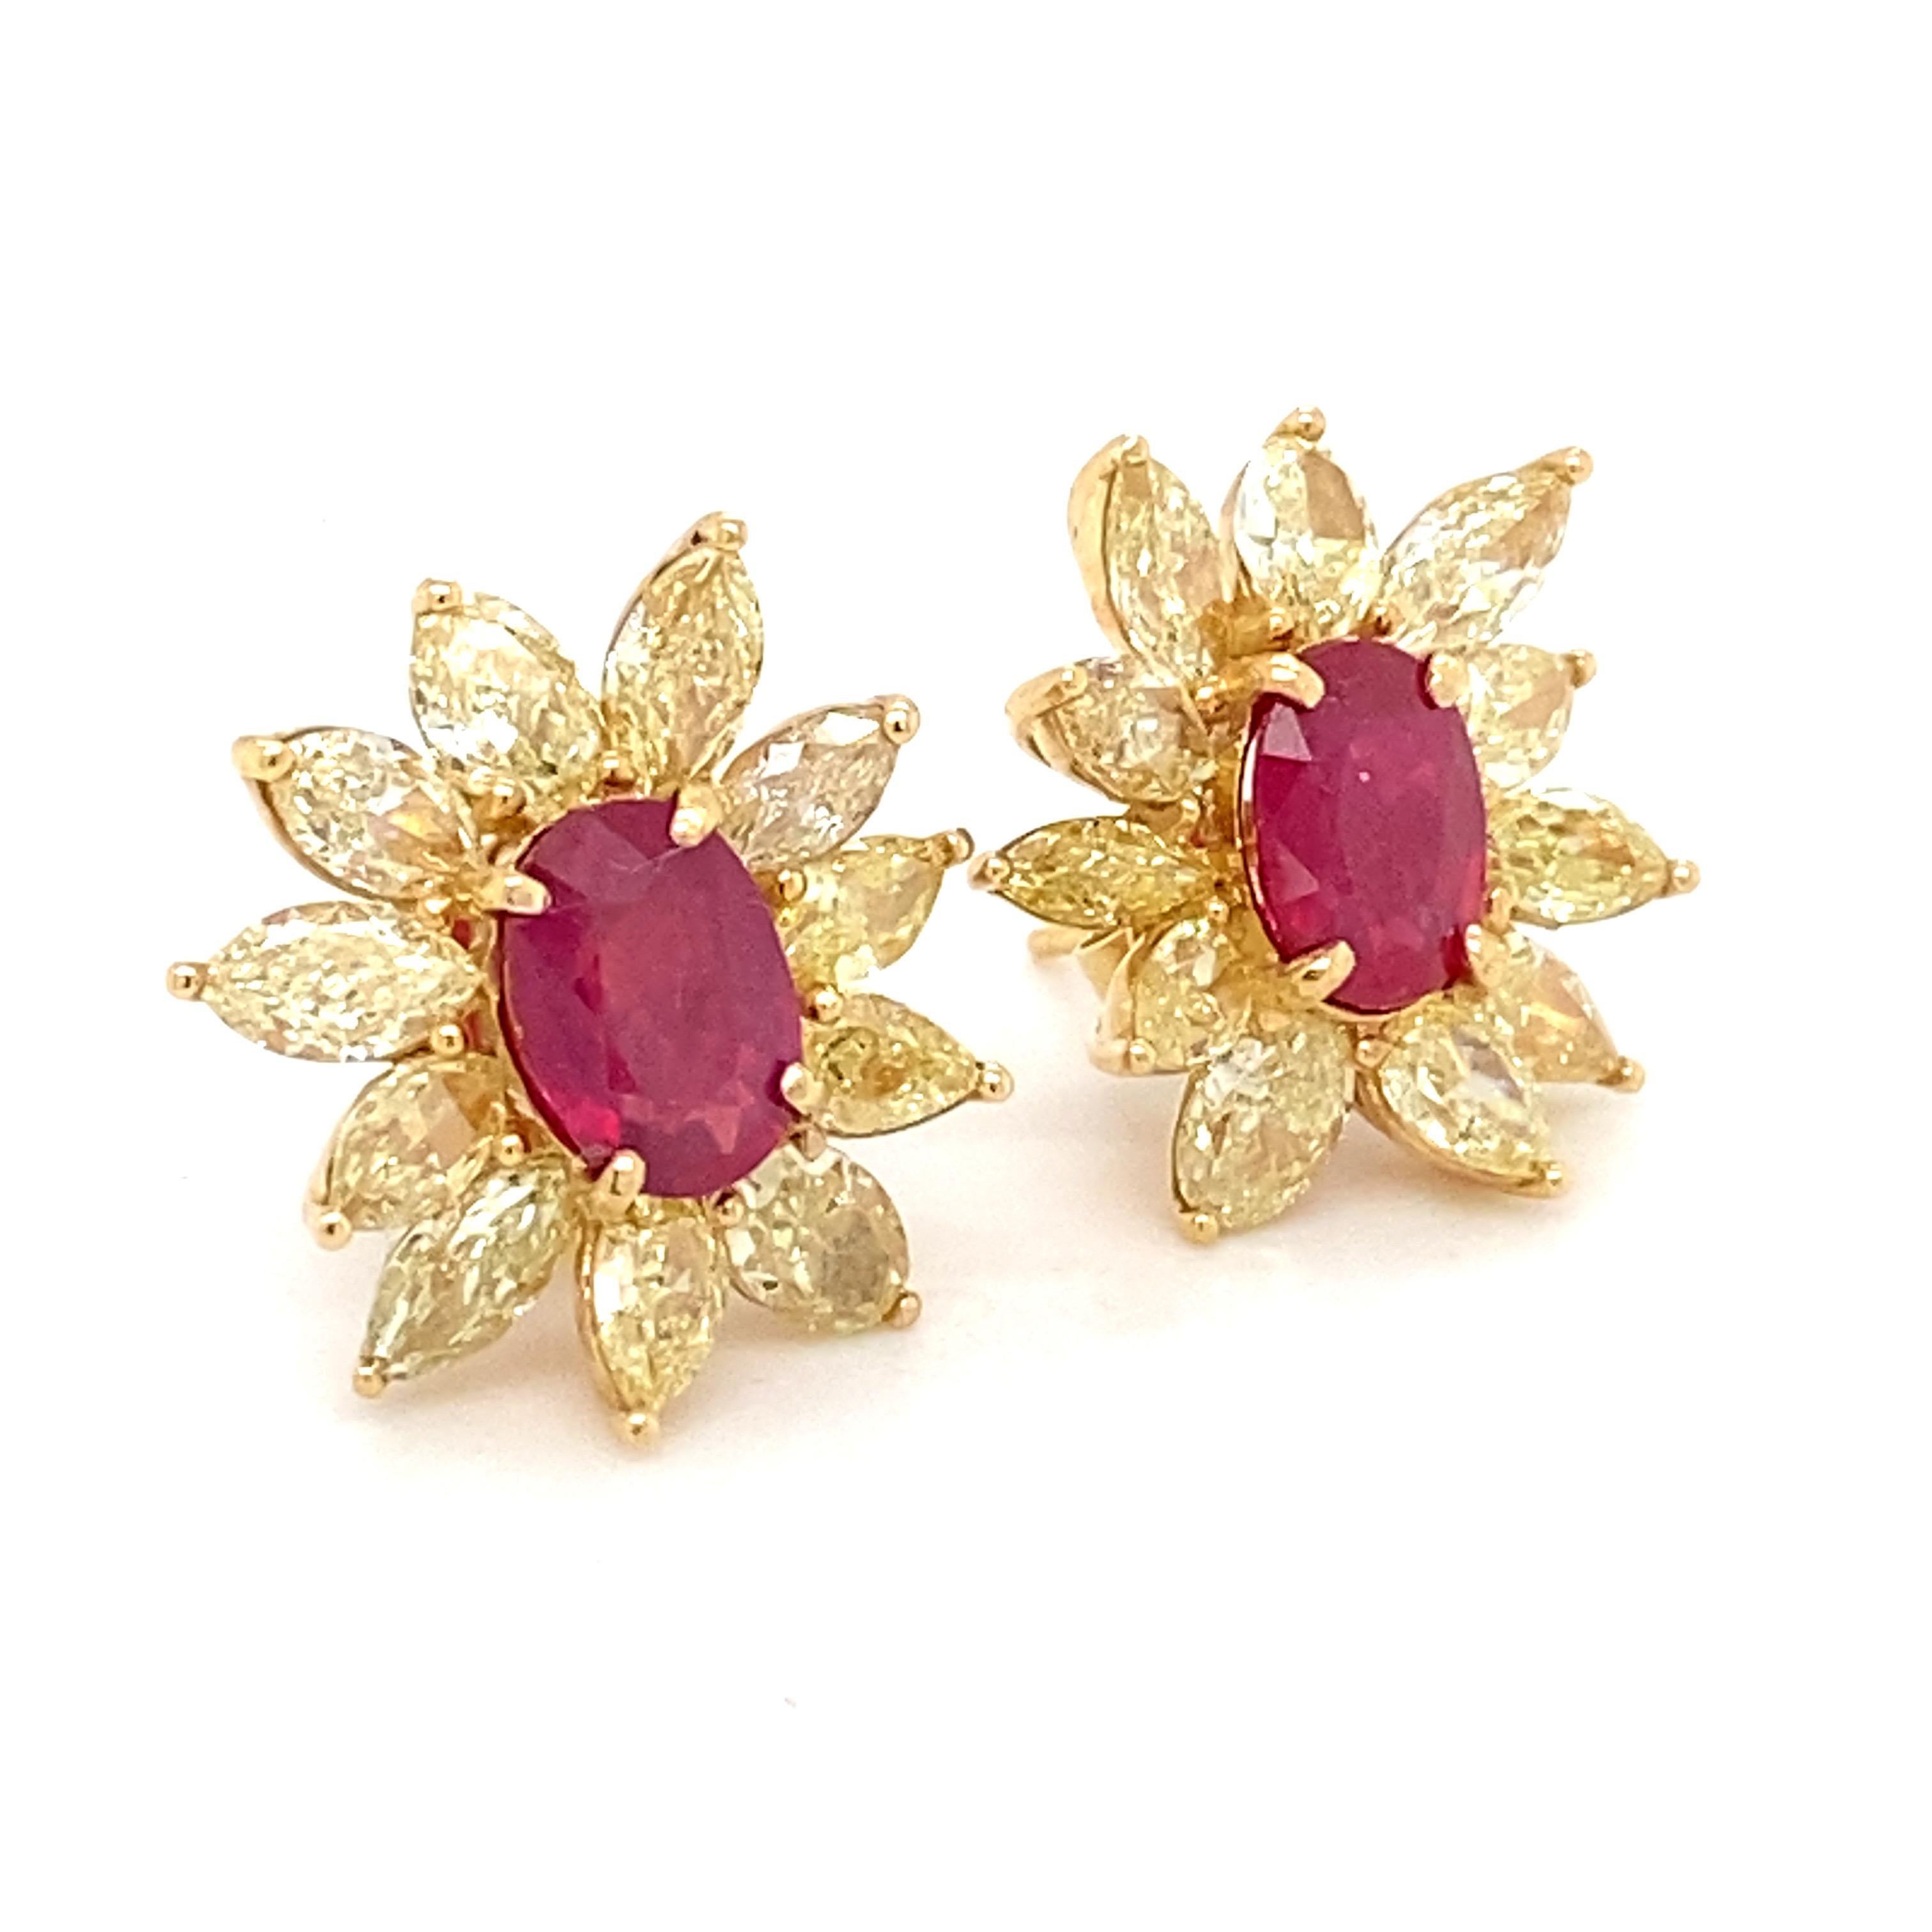 Marquise Cut 4.17 Carat Ruby 6.76 Carat Yellow Diamond Earrings For Sale